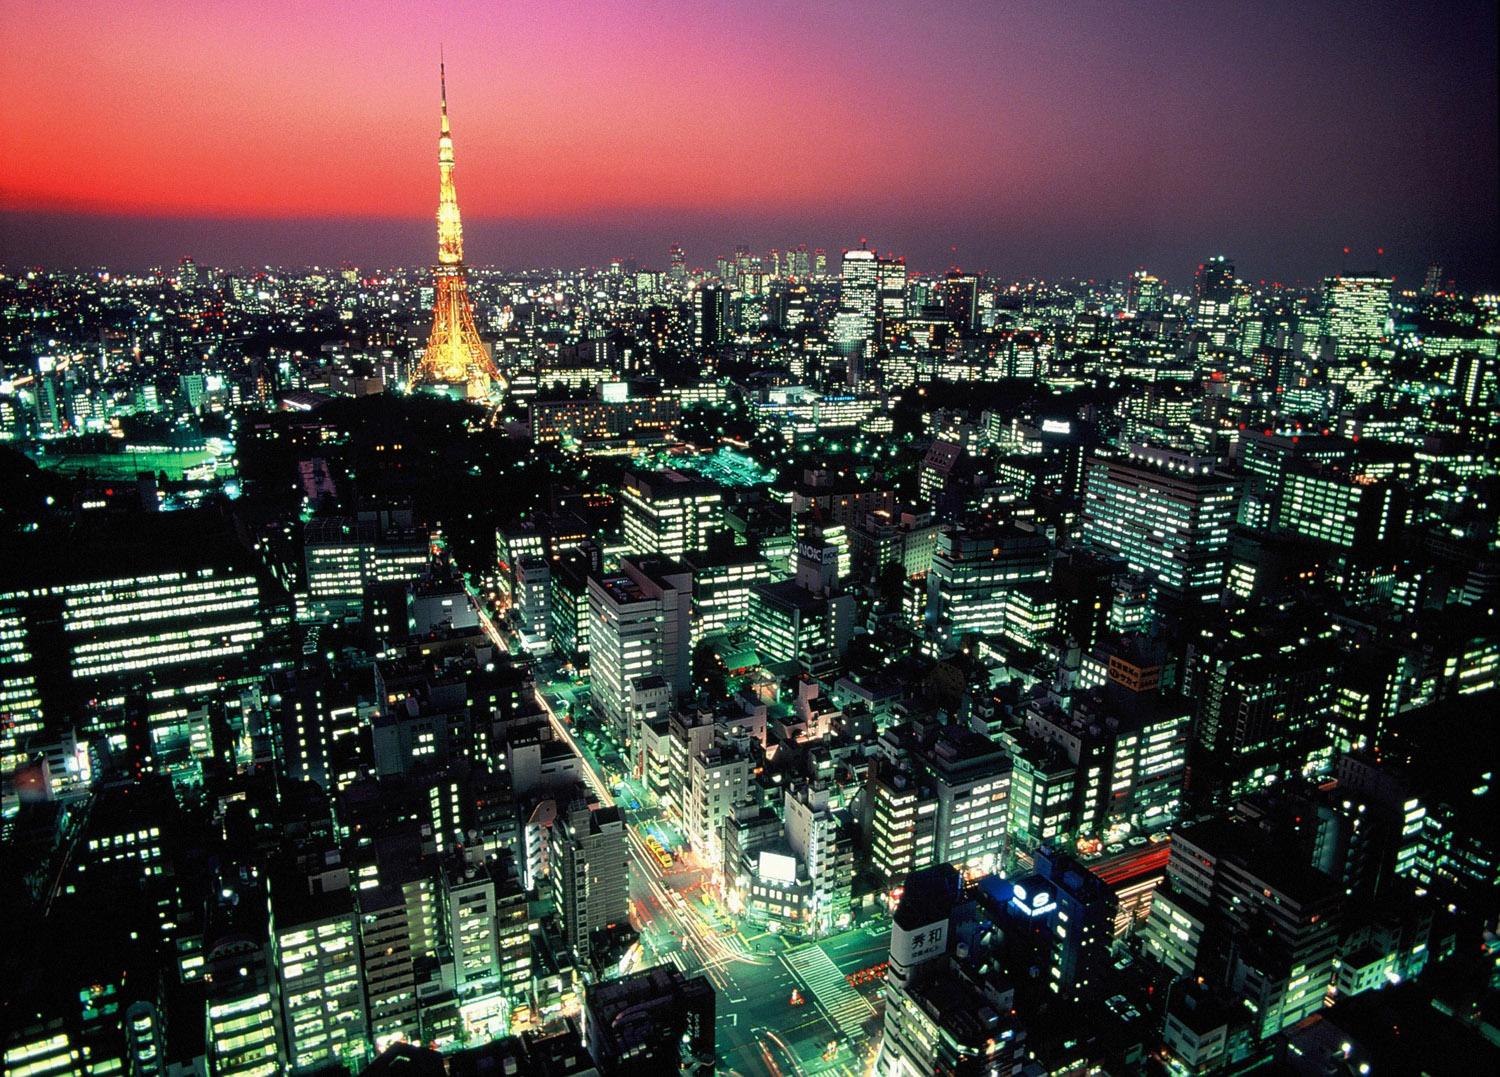 View of the Tokyo skyline by night